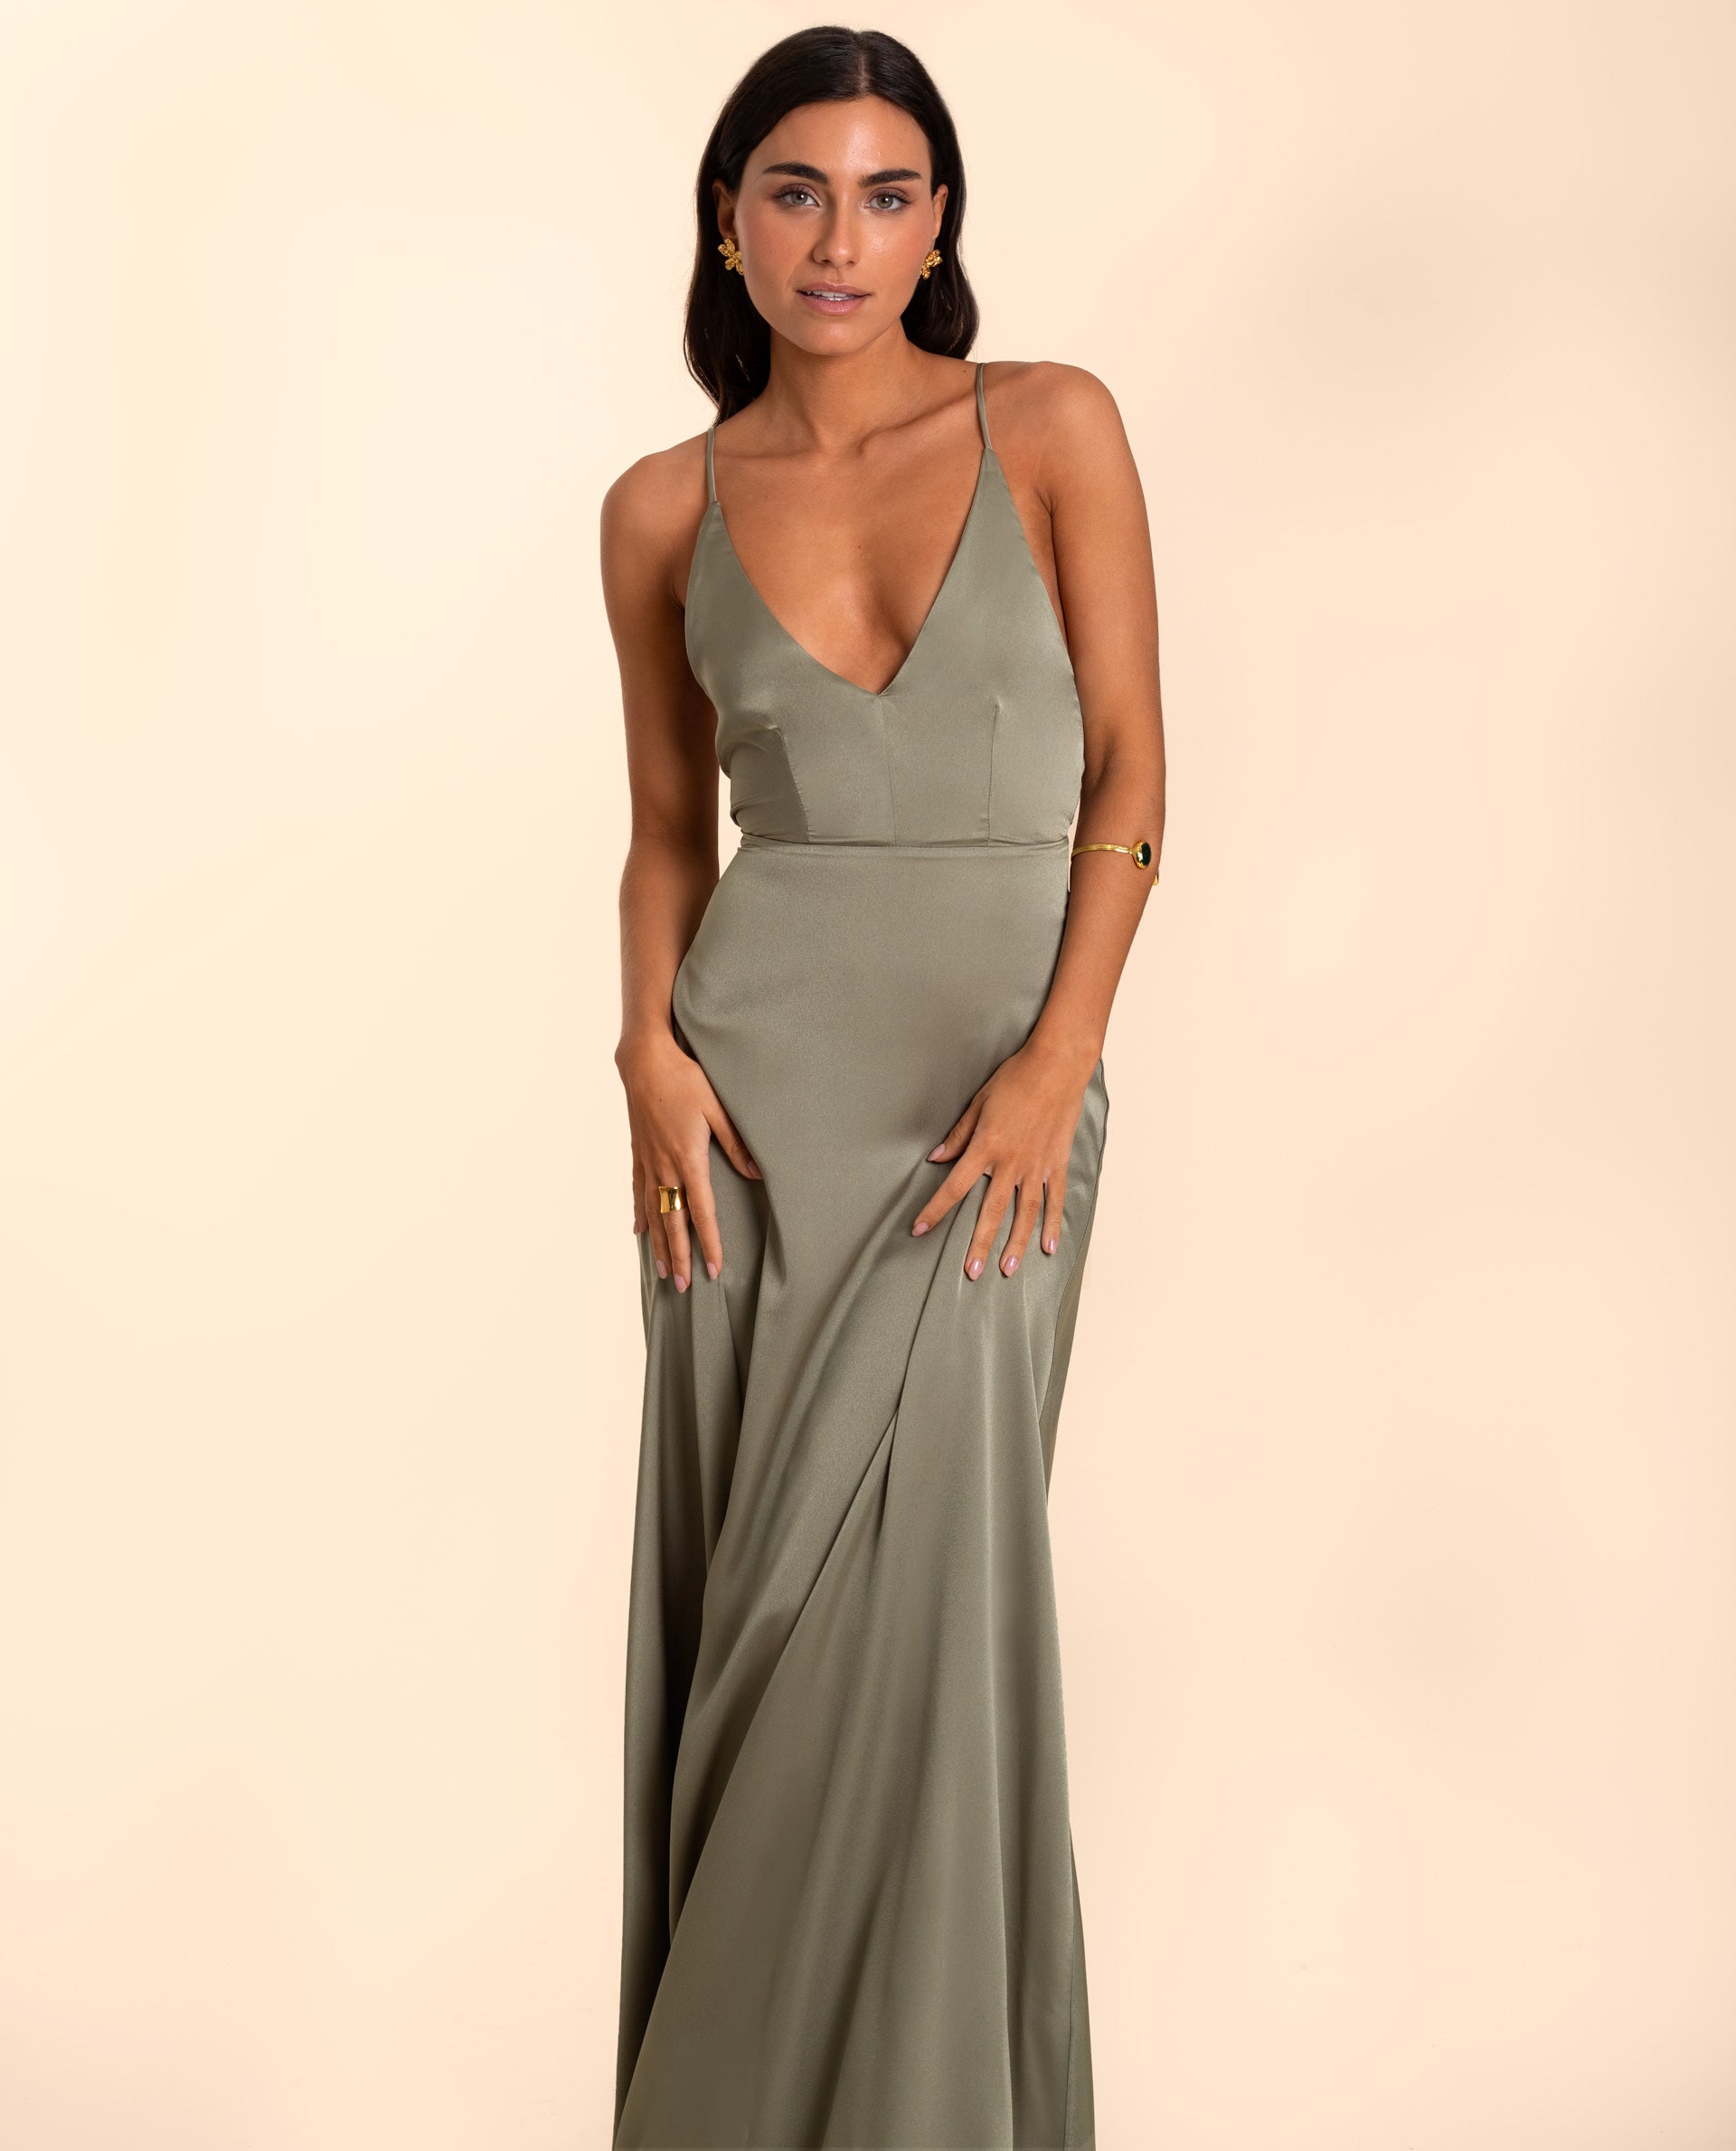 Long Strapless Dress with Bare Backs